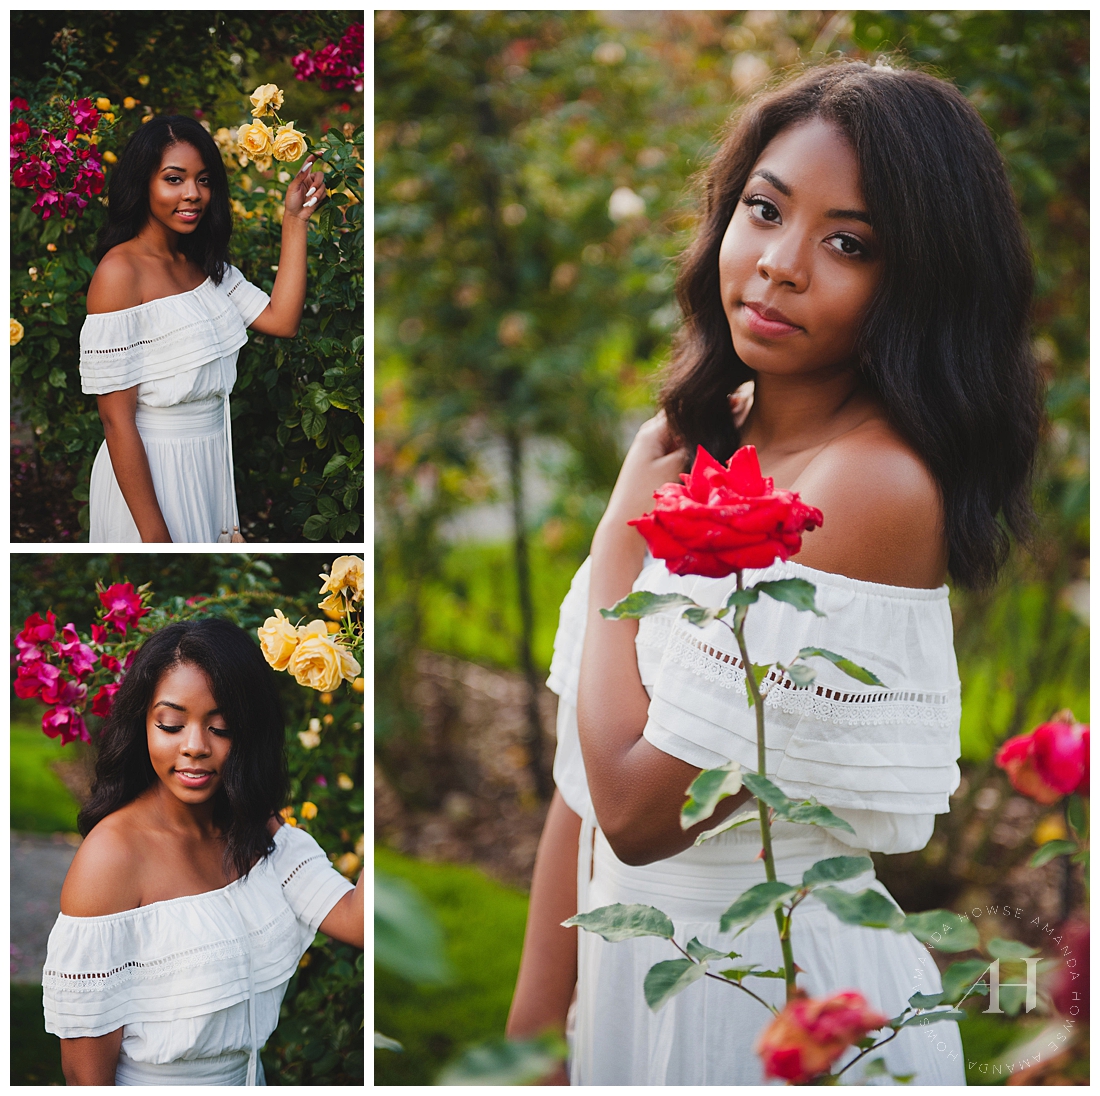 Modern Senior Portraits in a Rose Garden | Inspiration for Senior Portraits, Outfit Ideas, Professional Hair and Makeup | Photographed by Tacoma Senior Photographer Amanda Howse Photography